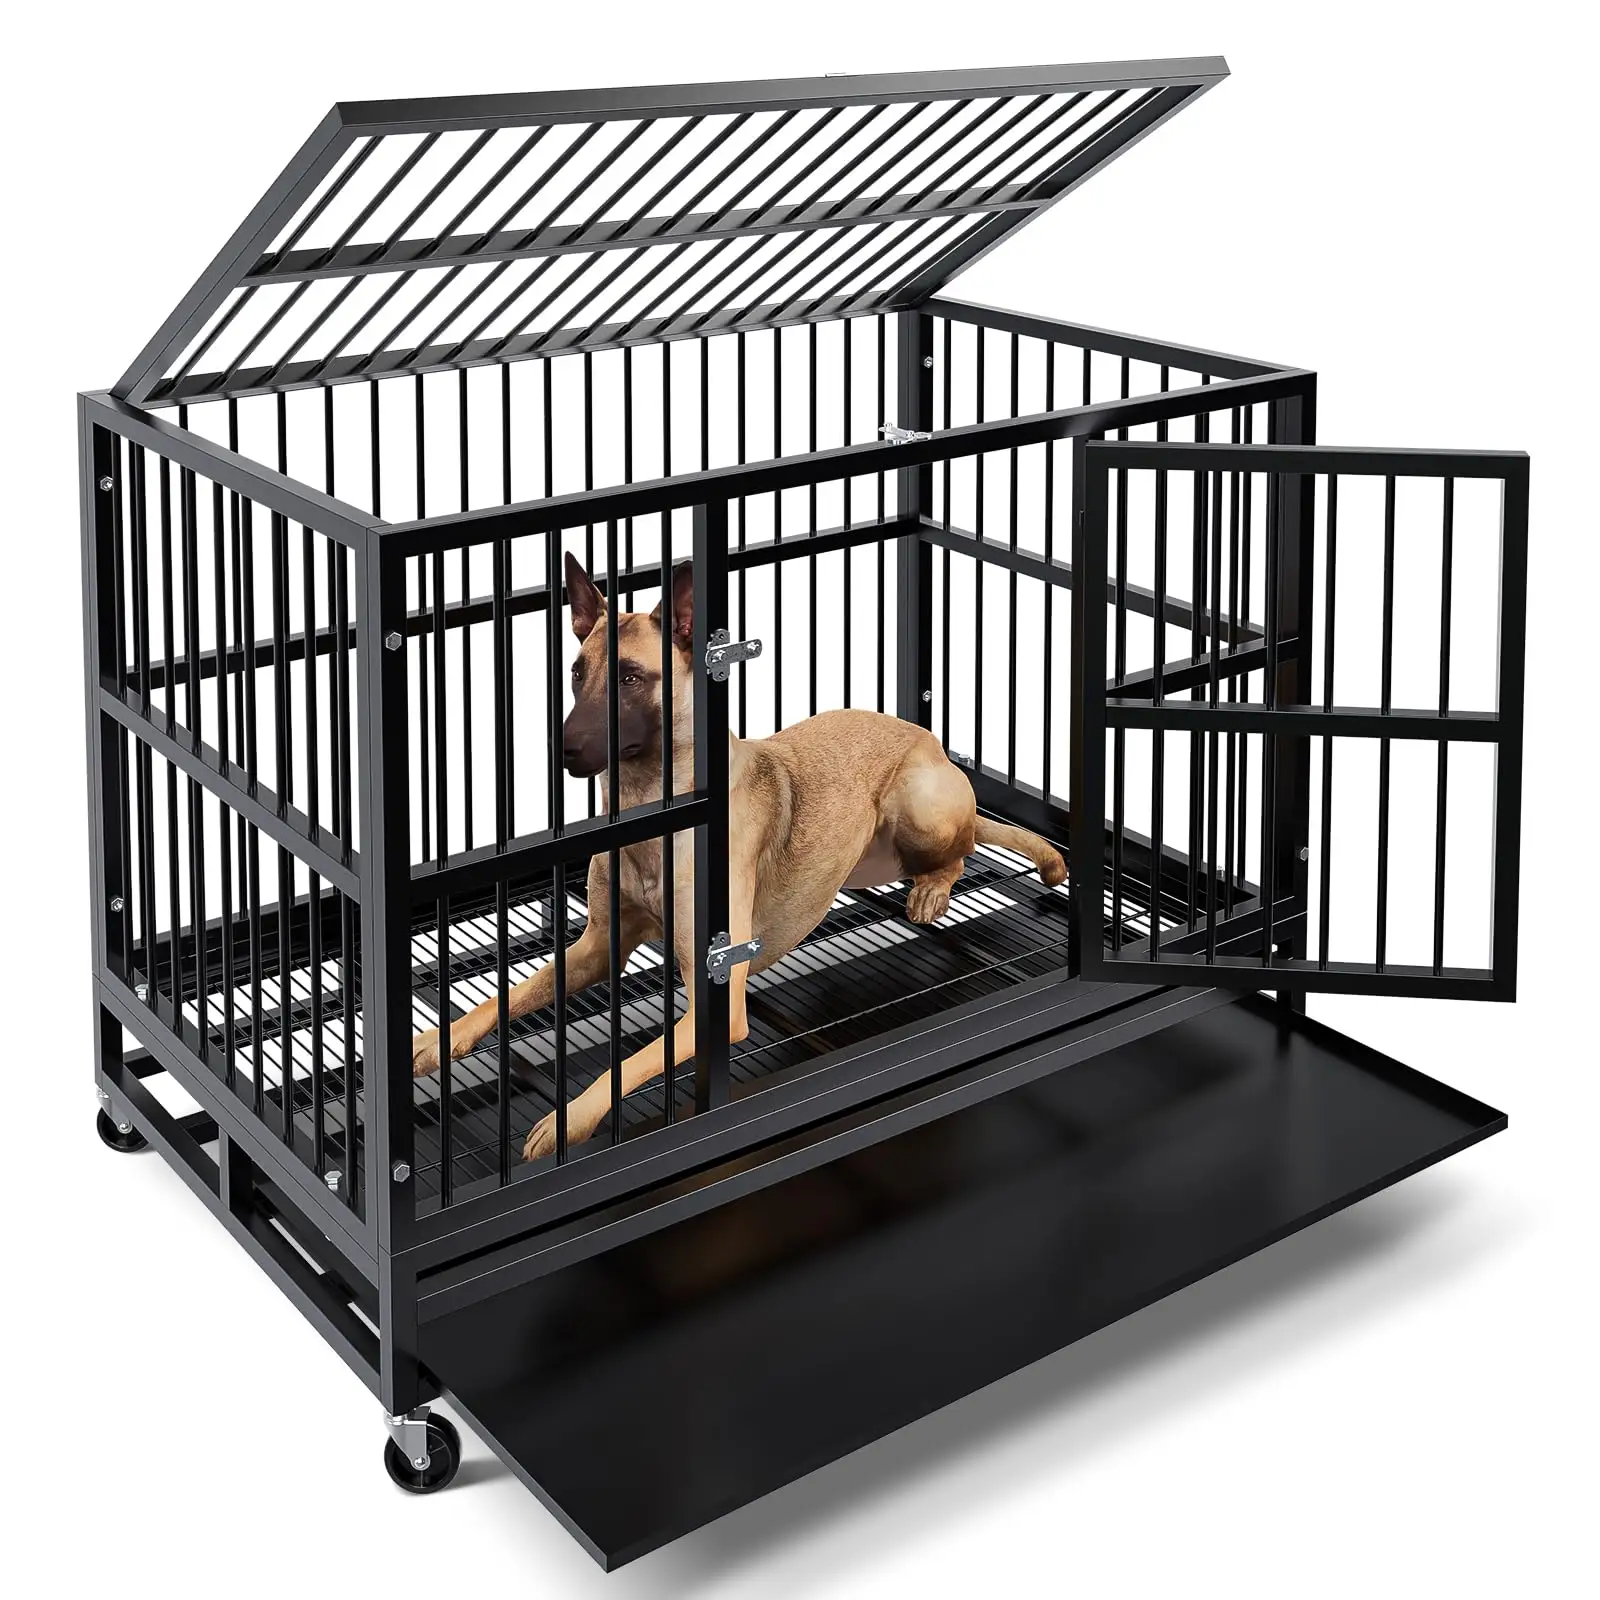 Black Colour Heavy Duty Dog Kennel Escape Proof StainlessSteel Pipe Large Dog Kennel With Wheels And Tray